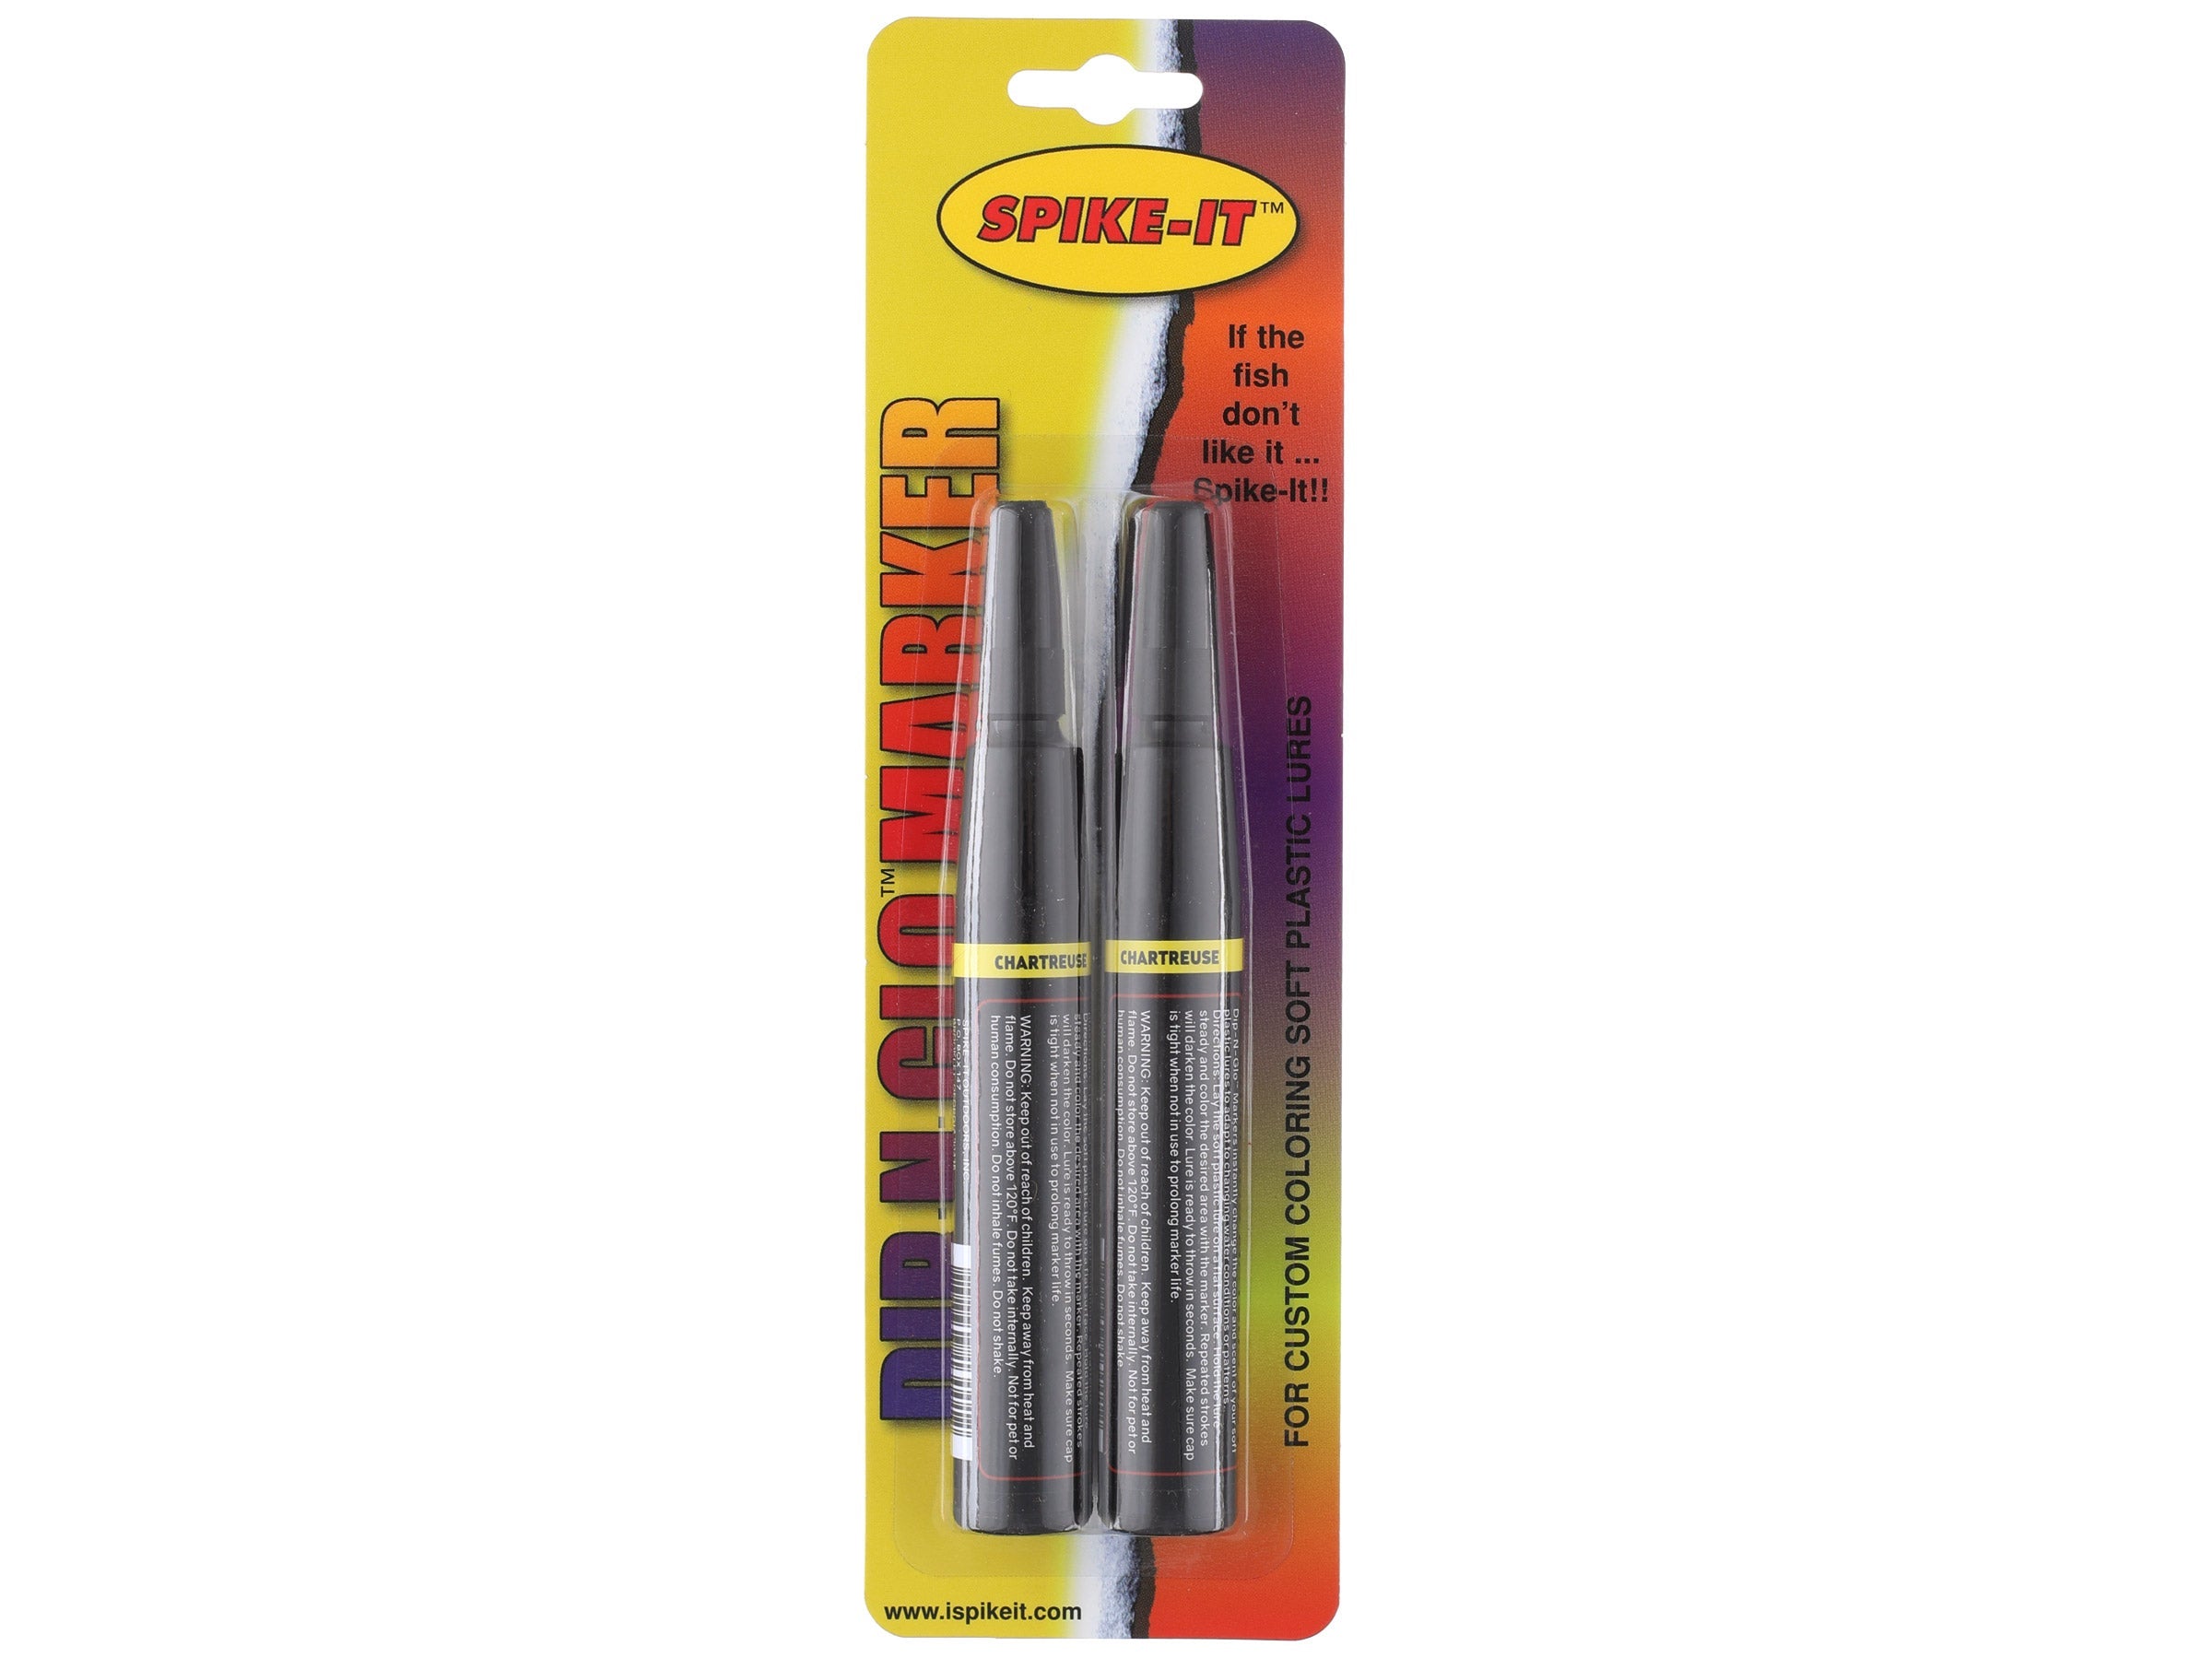 SPIKE-IT DIP-N-GLO MARKERS – The Bass Hole